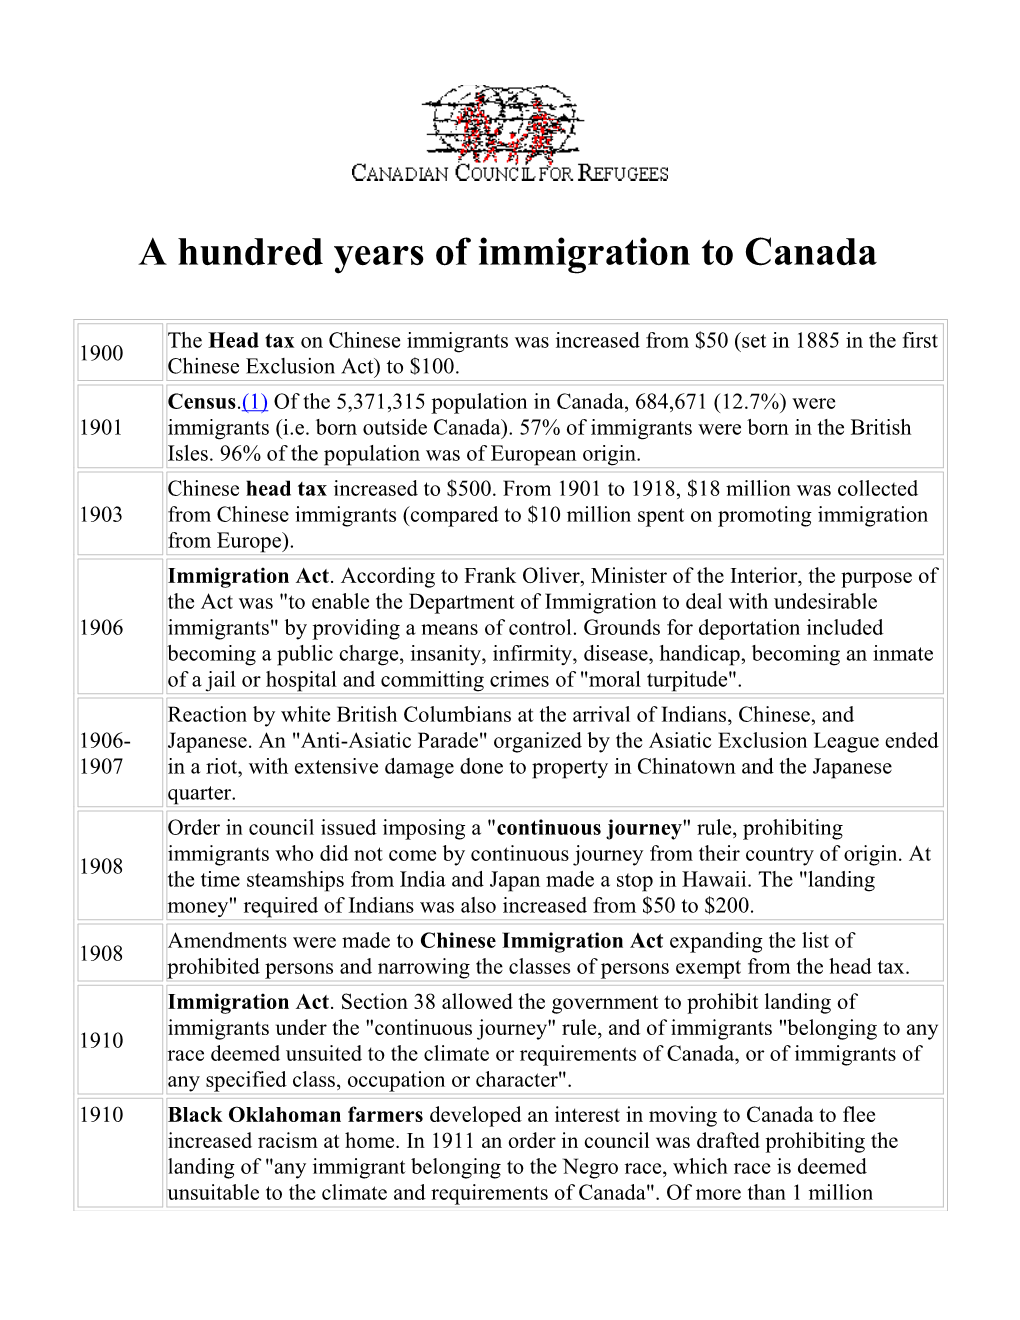 A Hundred Years of Immigration to Canada